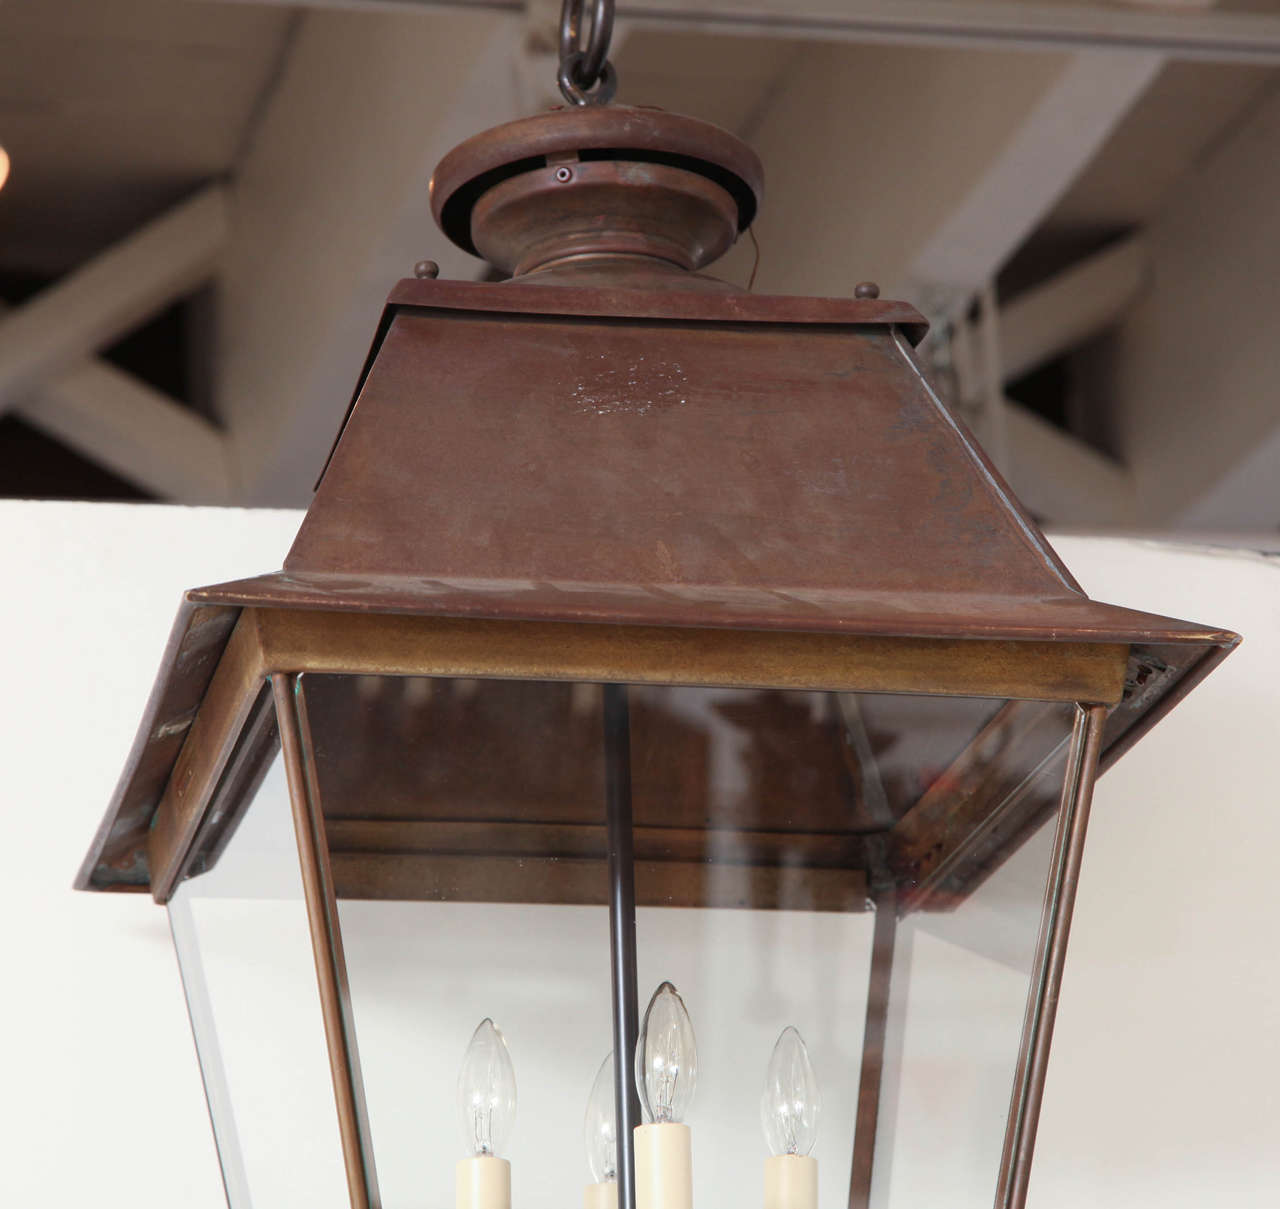 Large Copper and Glass Square Lanterns, France circa 1950 4